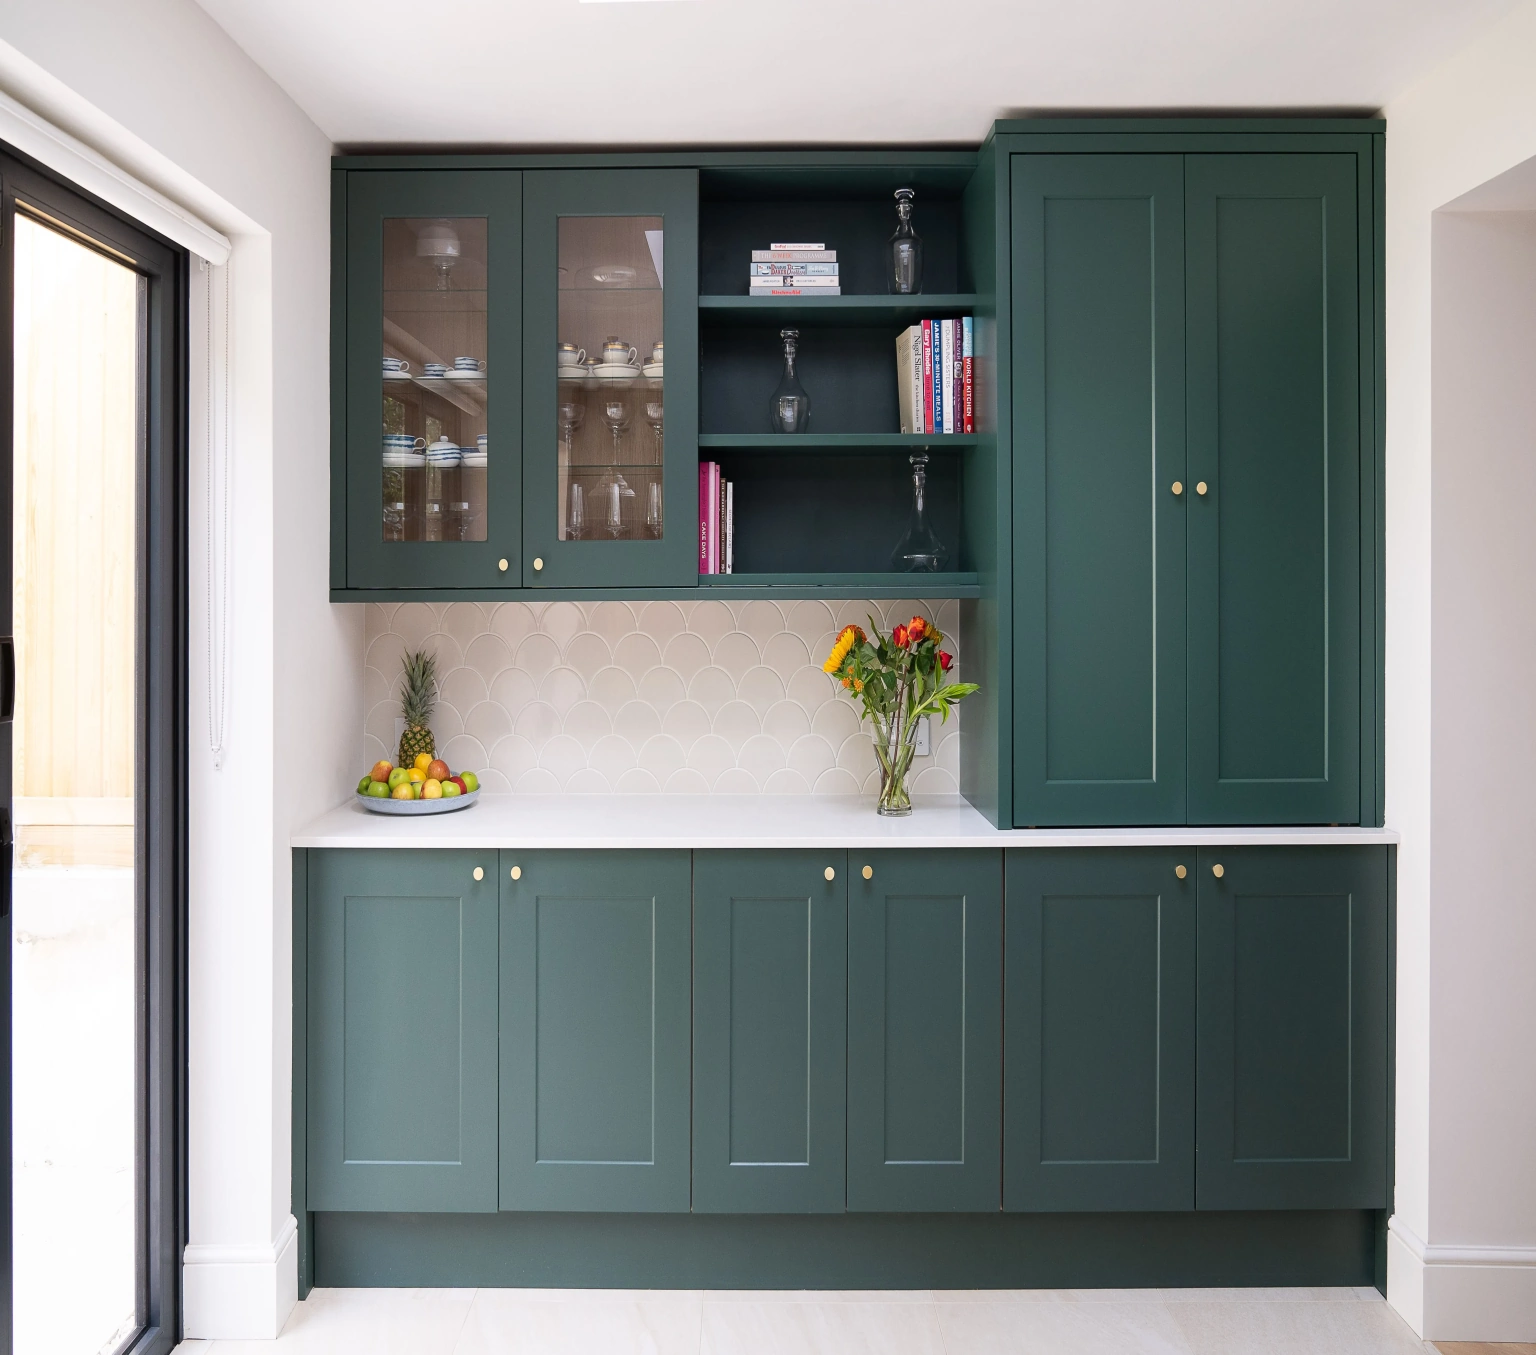 Green color cabinets and wardrobe in home interiors